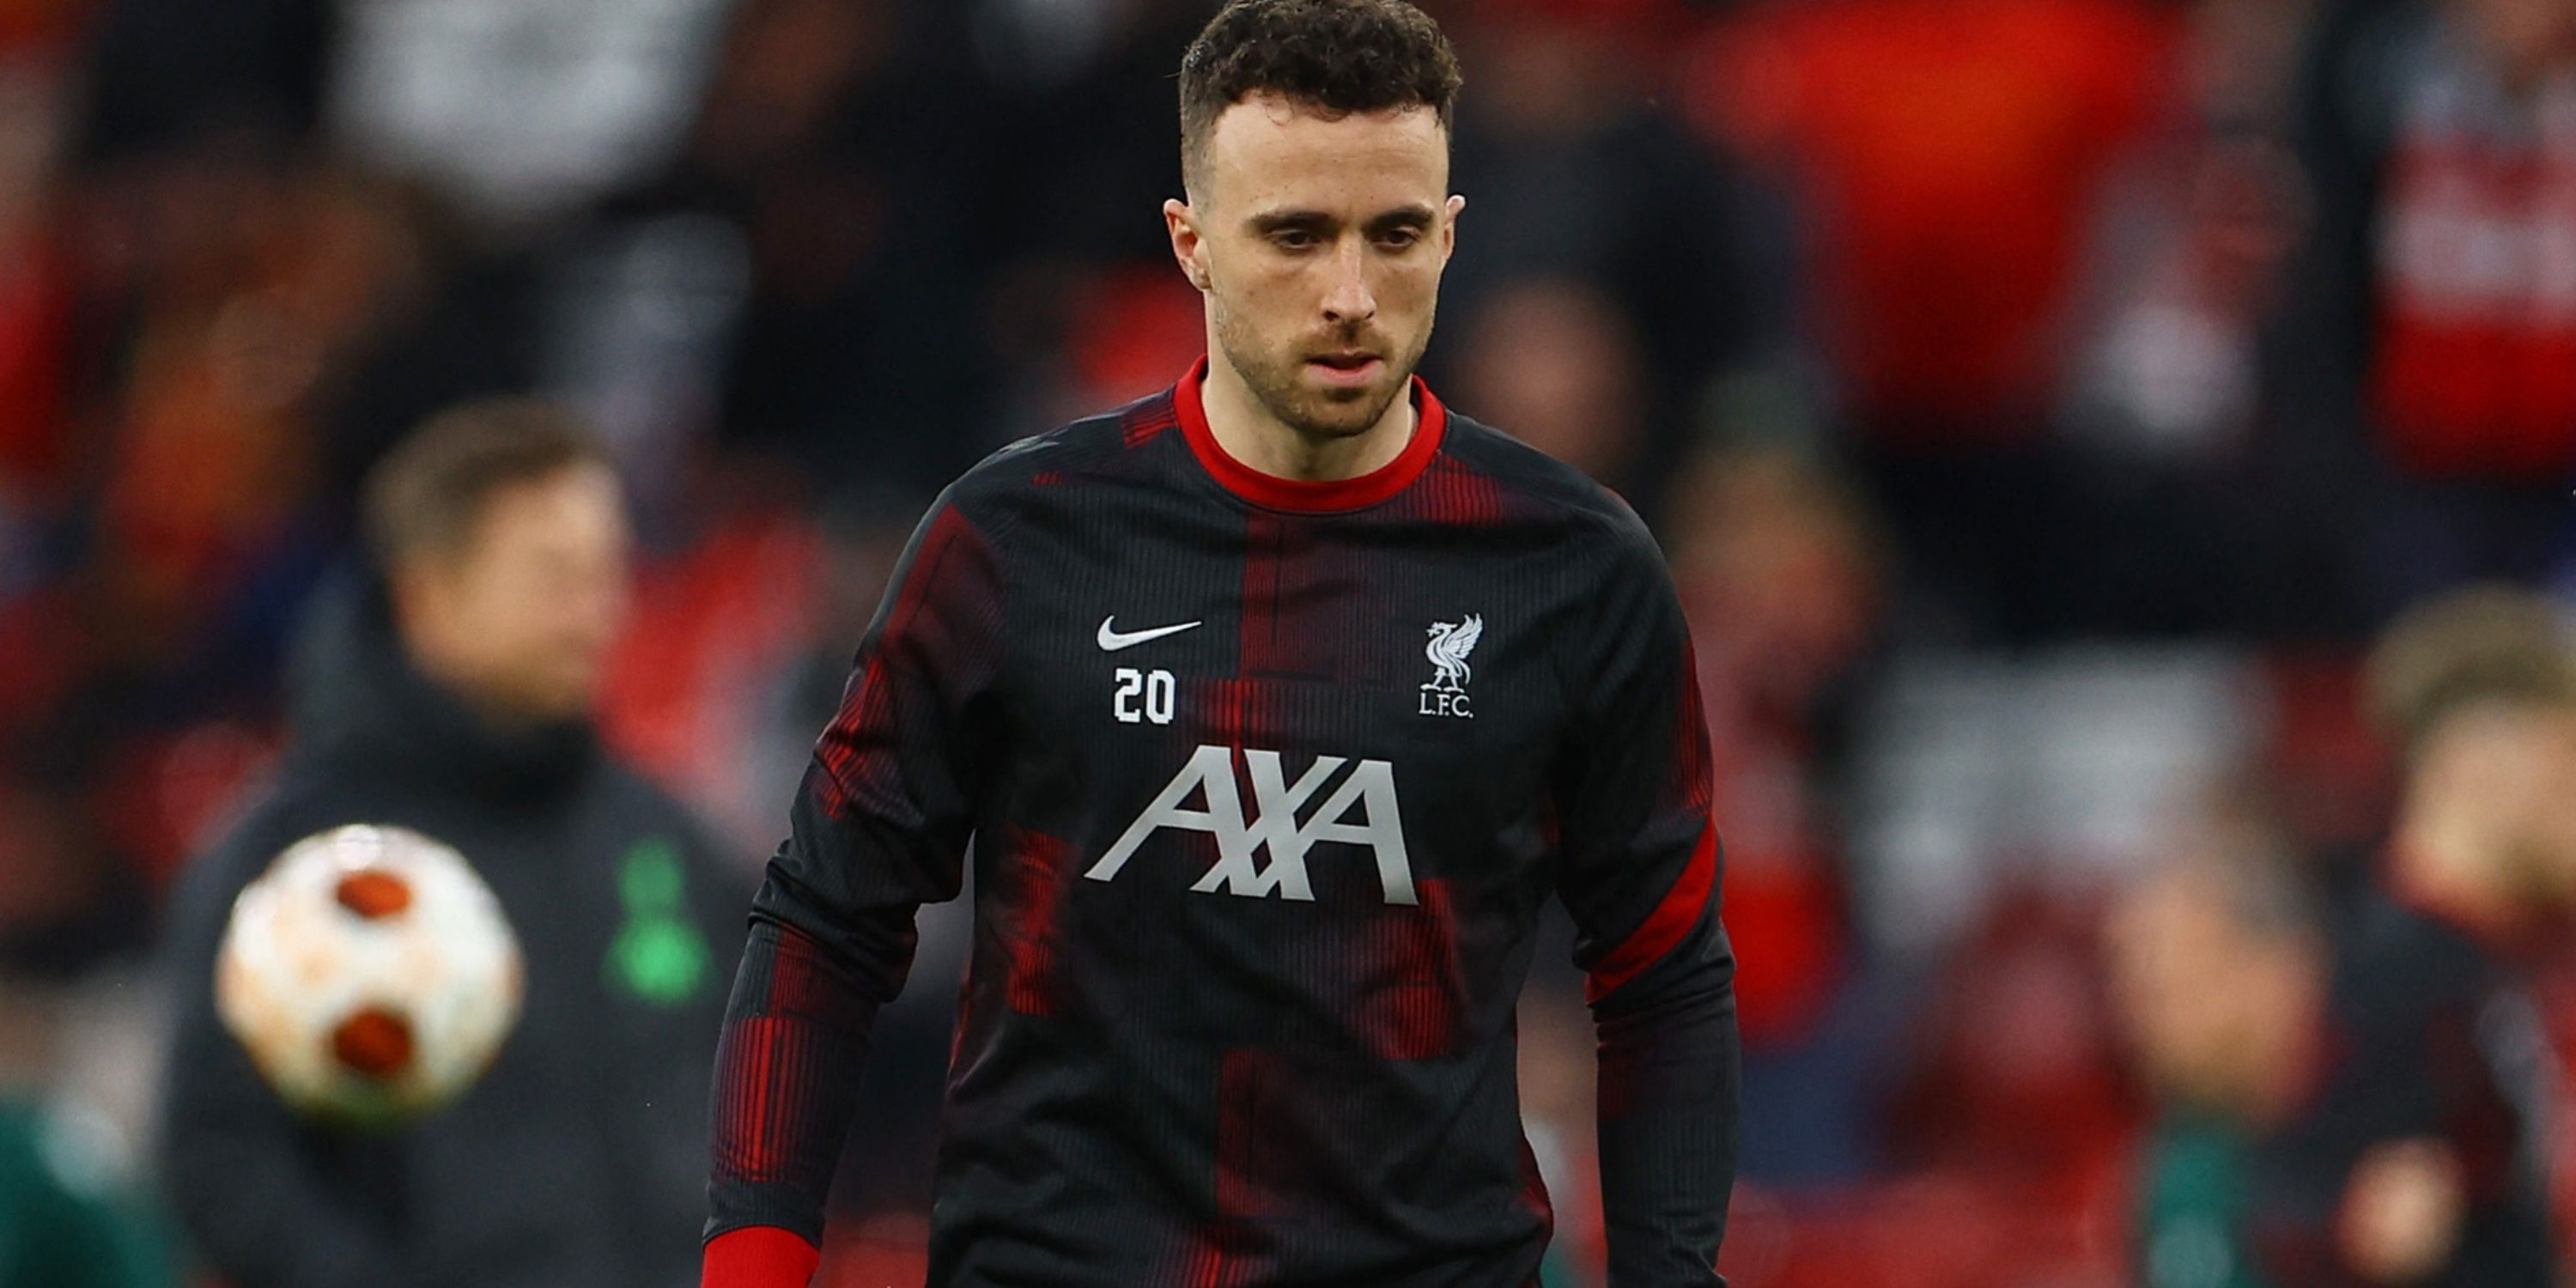 Diogo Jota warming up for Liverpool